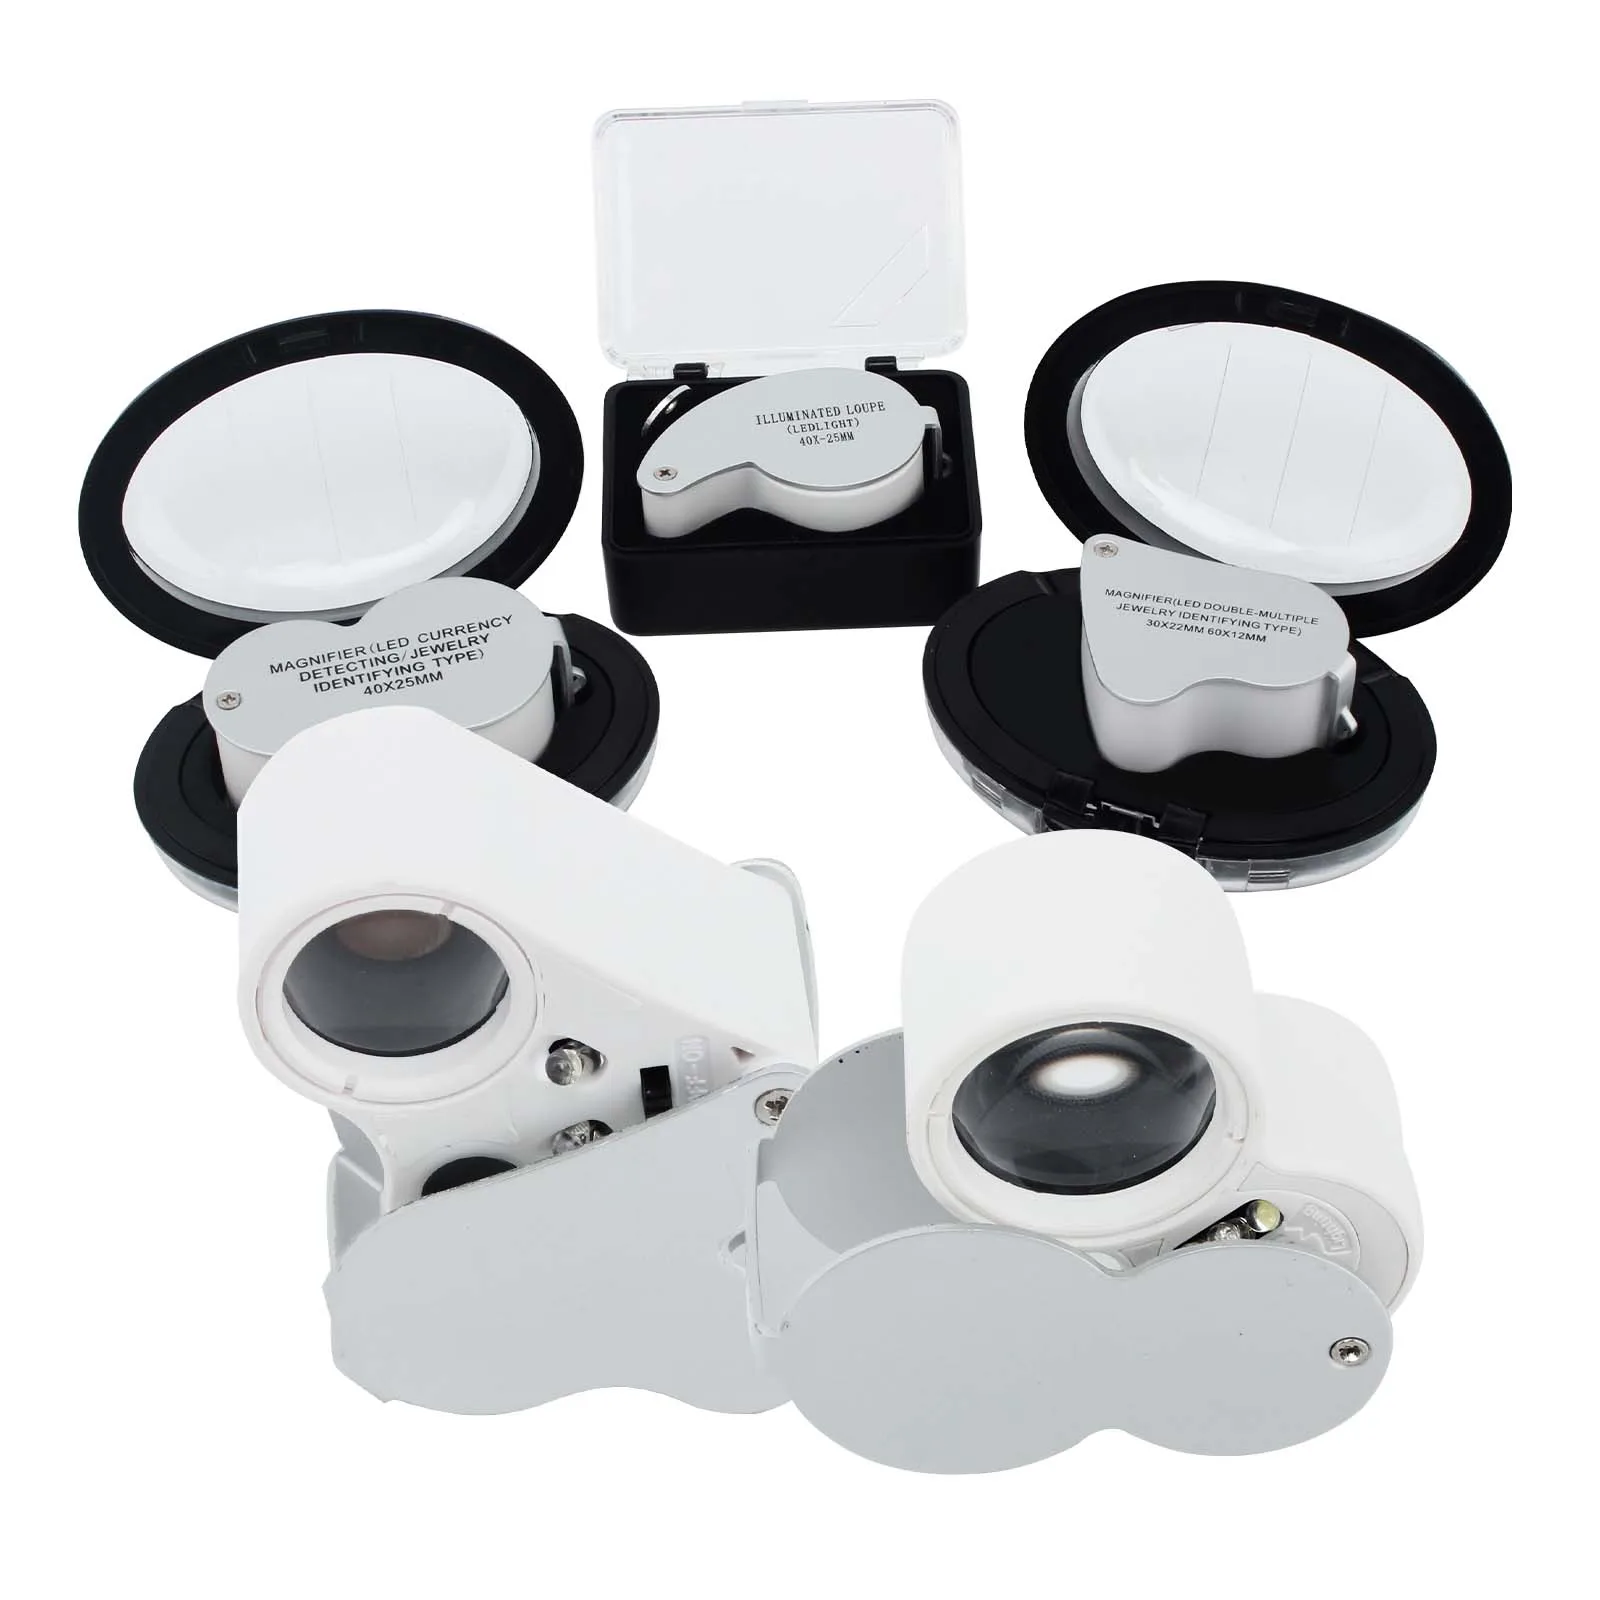 

30X 40X 60X Illuminated Jewelers Eye Loupe Magnifier, Foldable Jewelry Magnifiers with Bright LED Light for Gems, Jewelry, etc